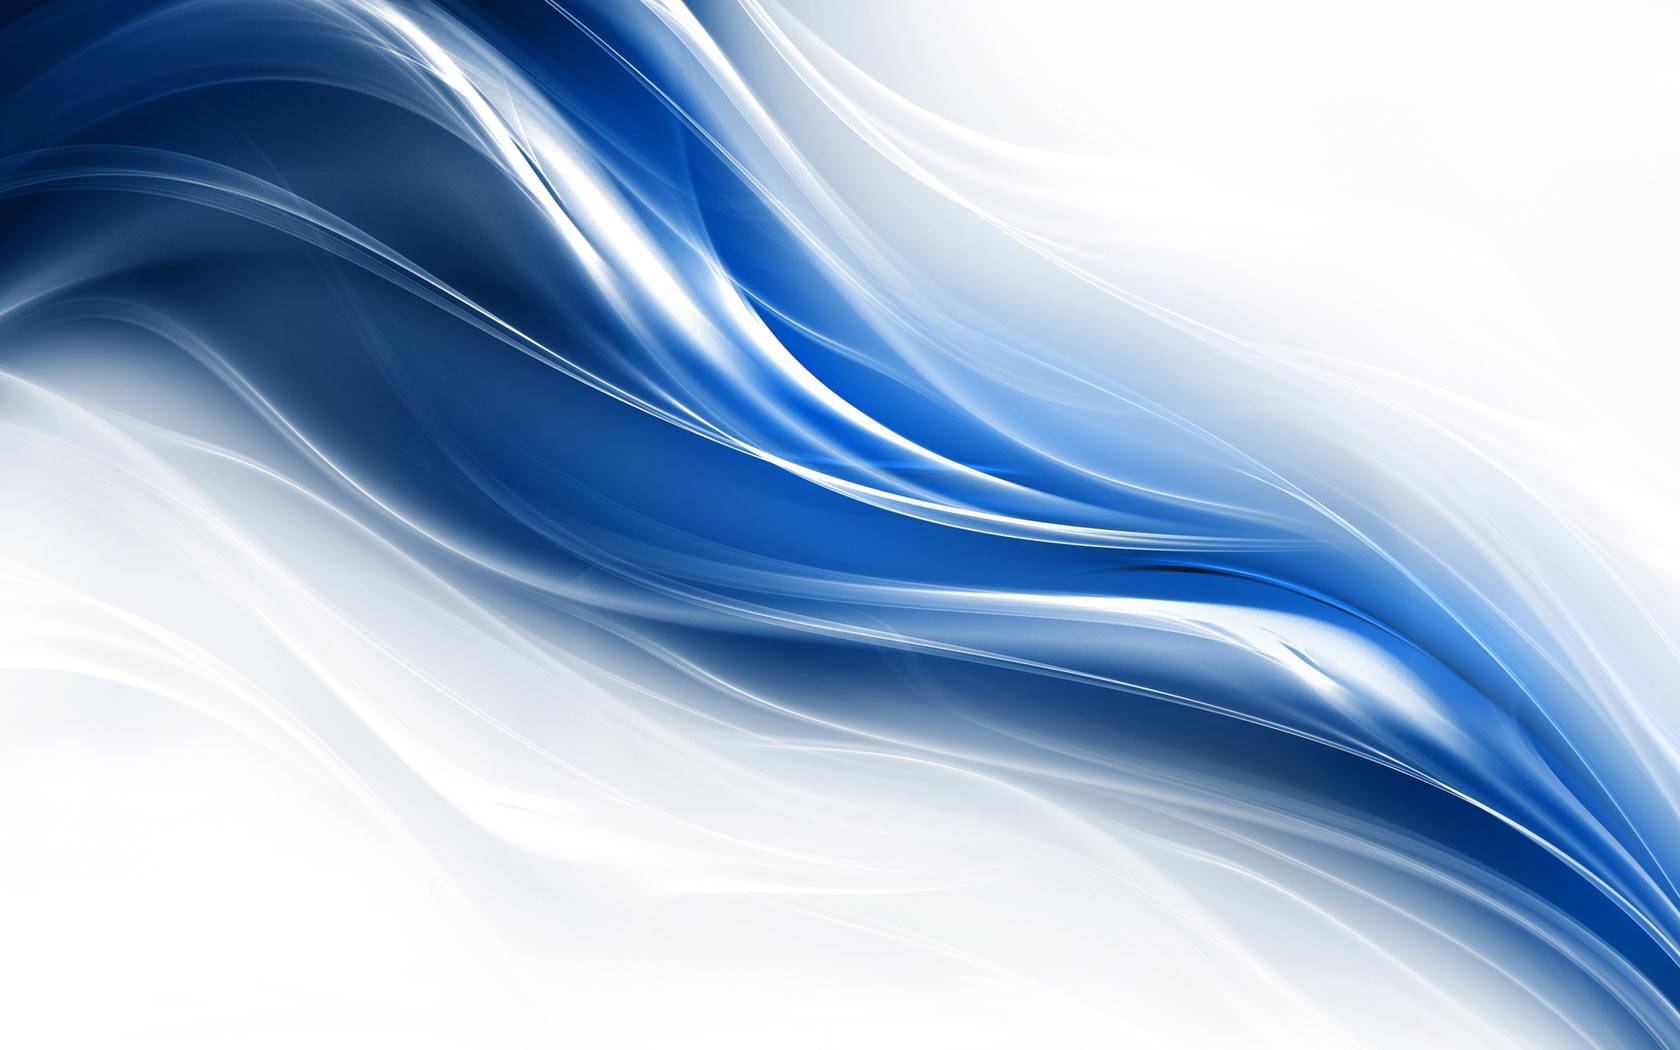 ... Wallpapers Inbox Abstract White And Blue (id: 27515) | Buzzerg.com ...